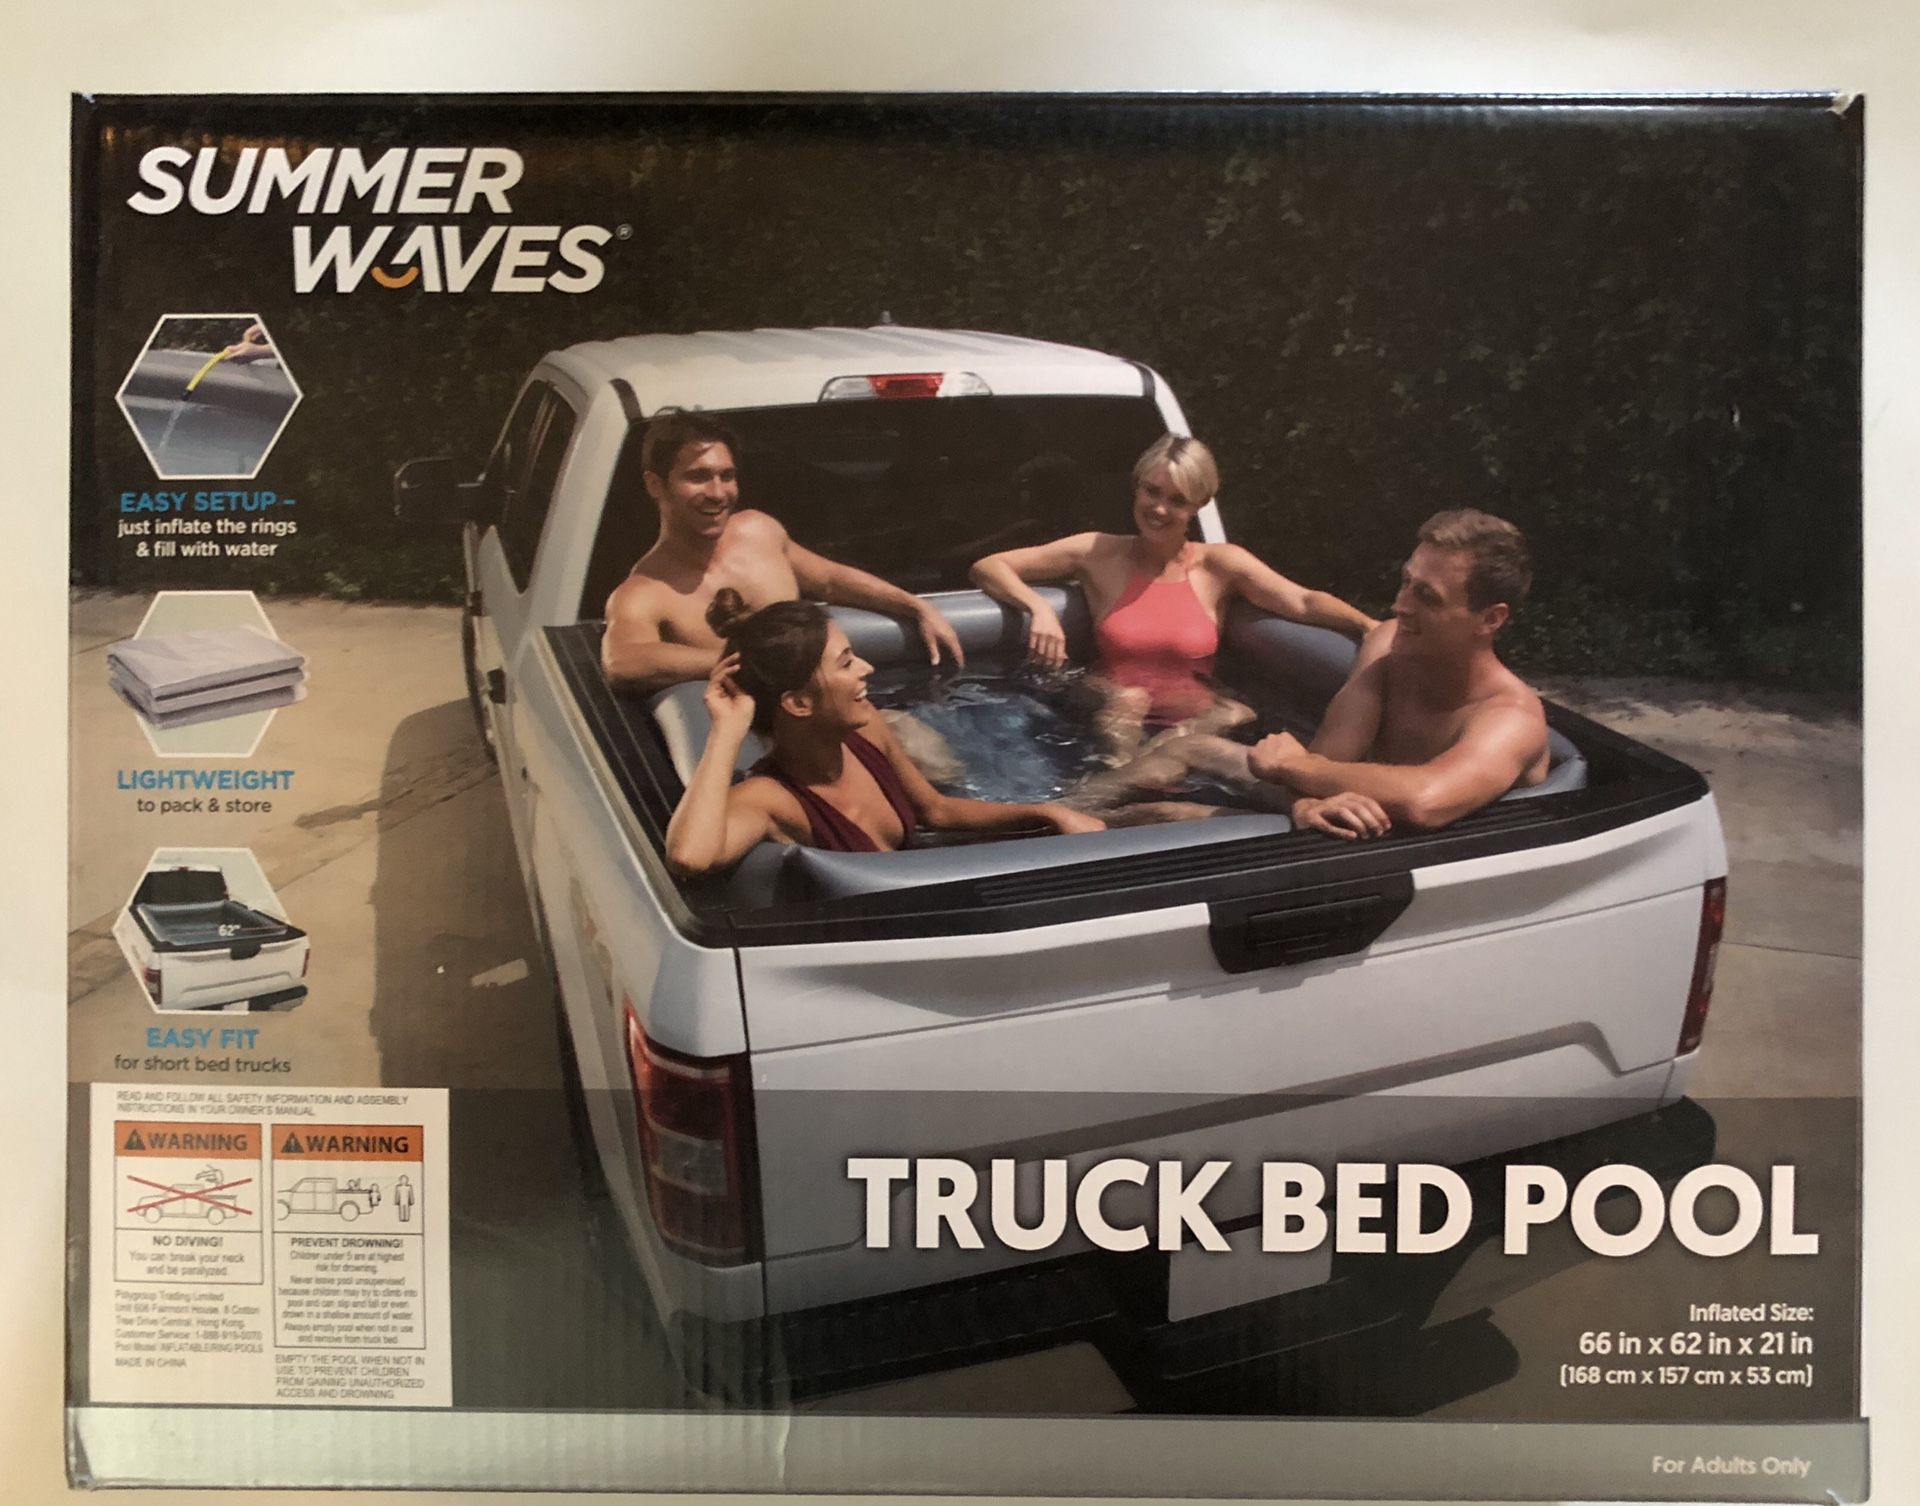 Summer Waves - Truck Bed Pool - New!